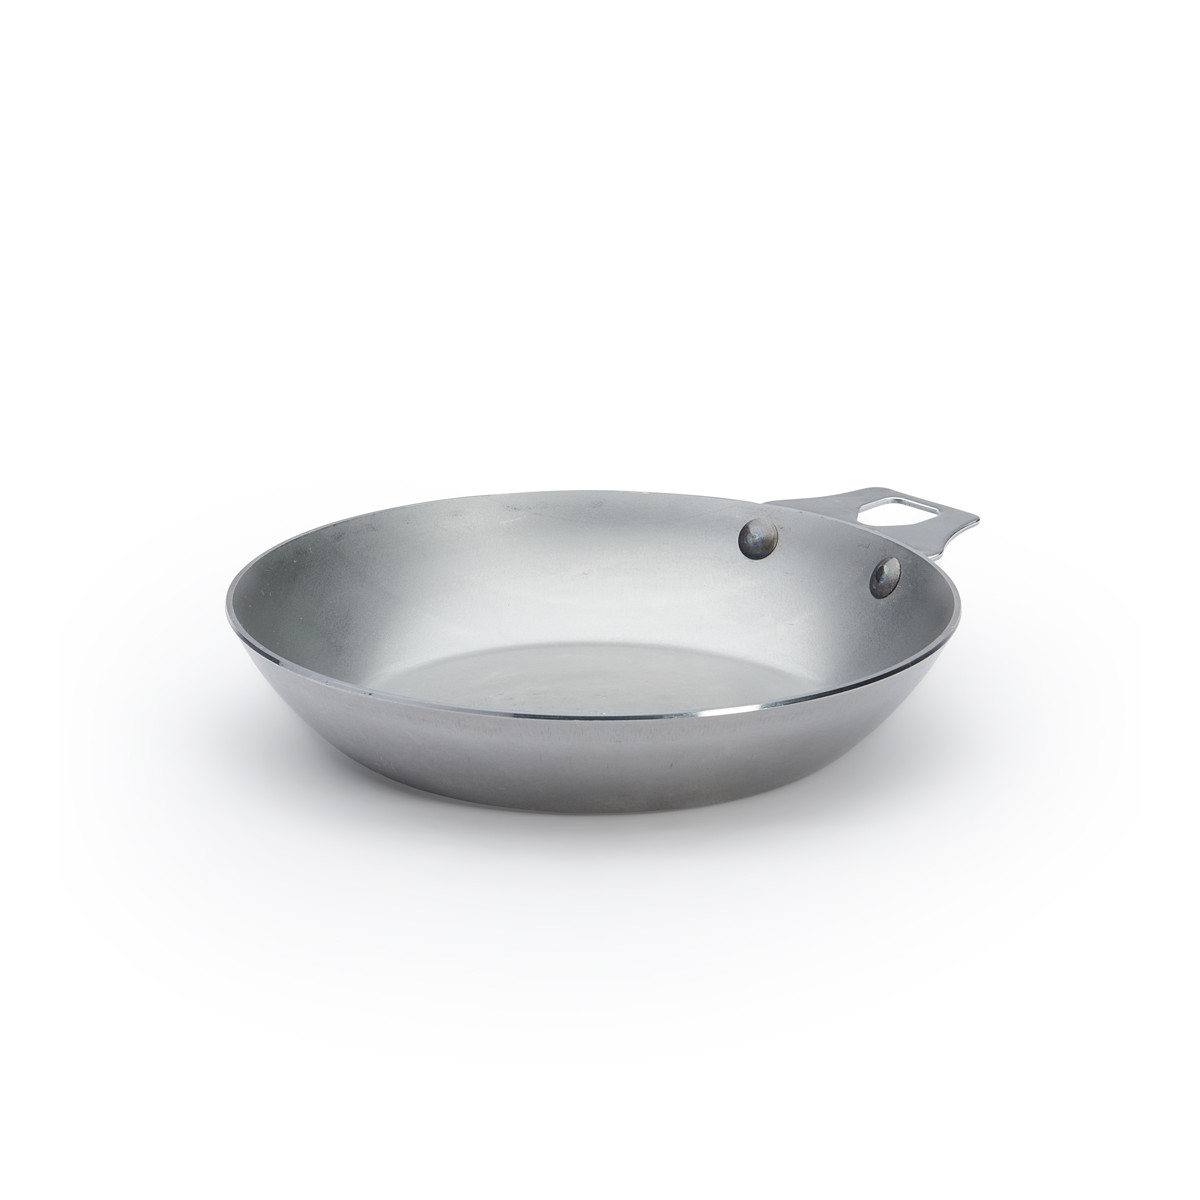 De Buyer Mineral B Removable Frying Pan - 3 Sizes